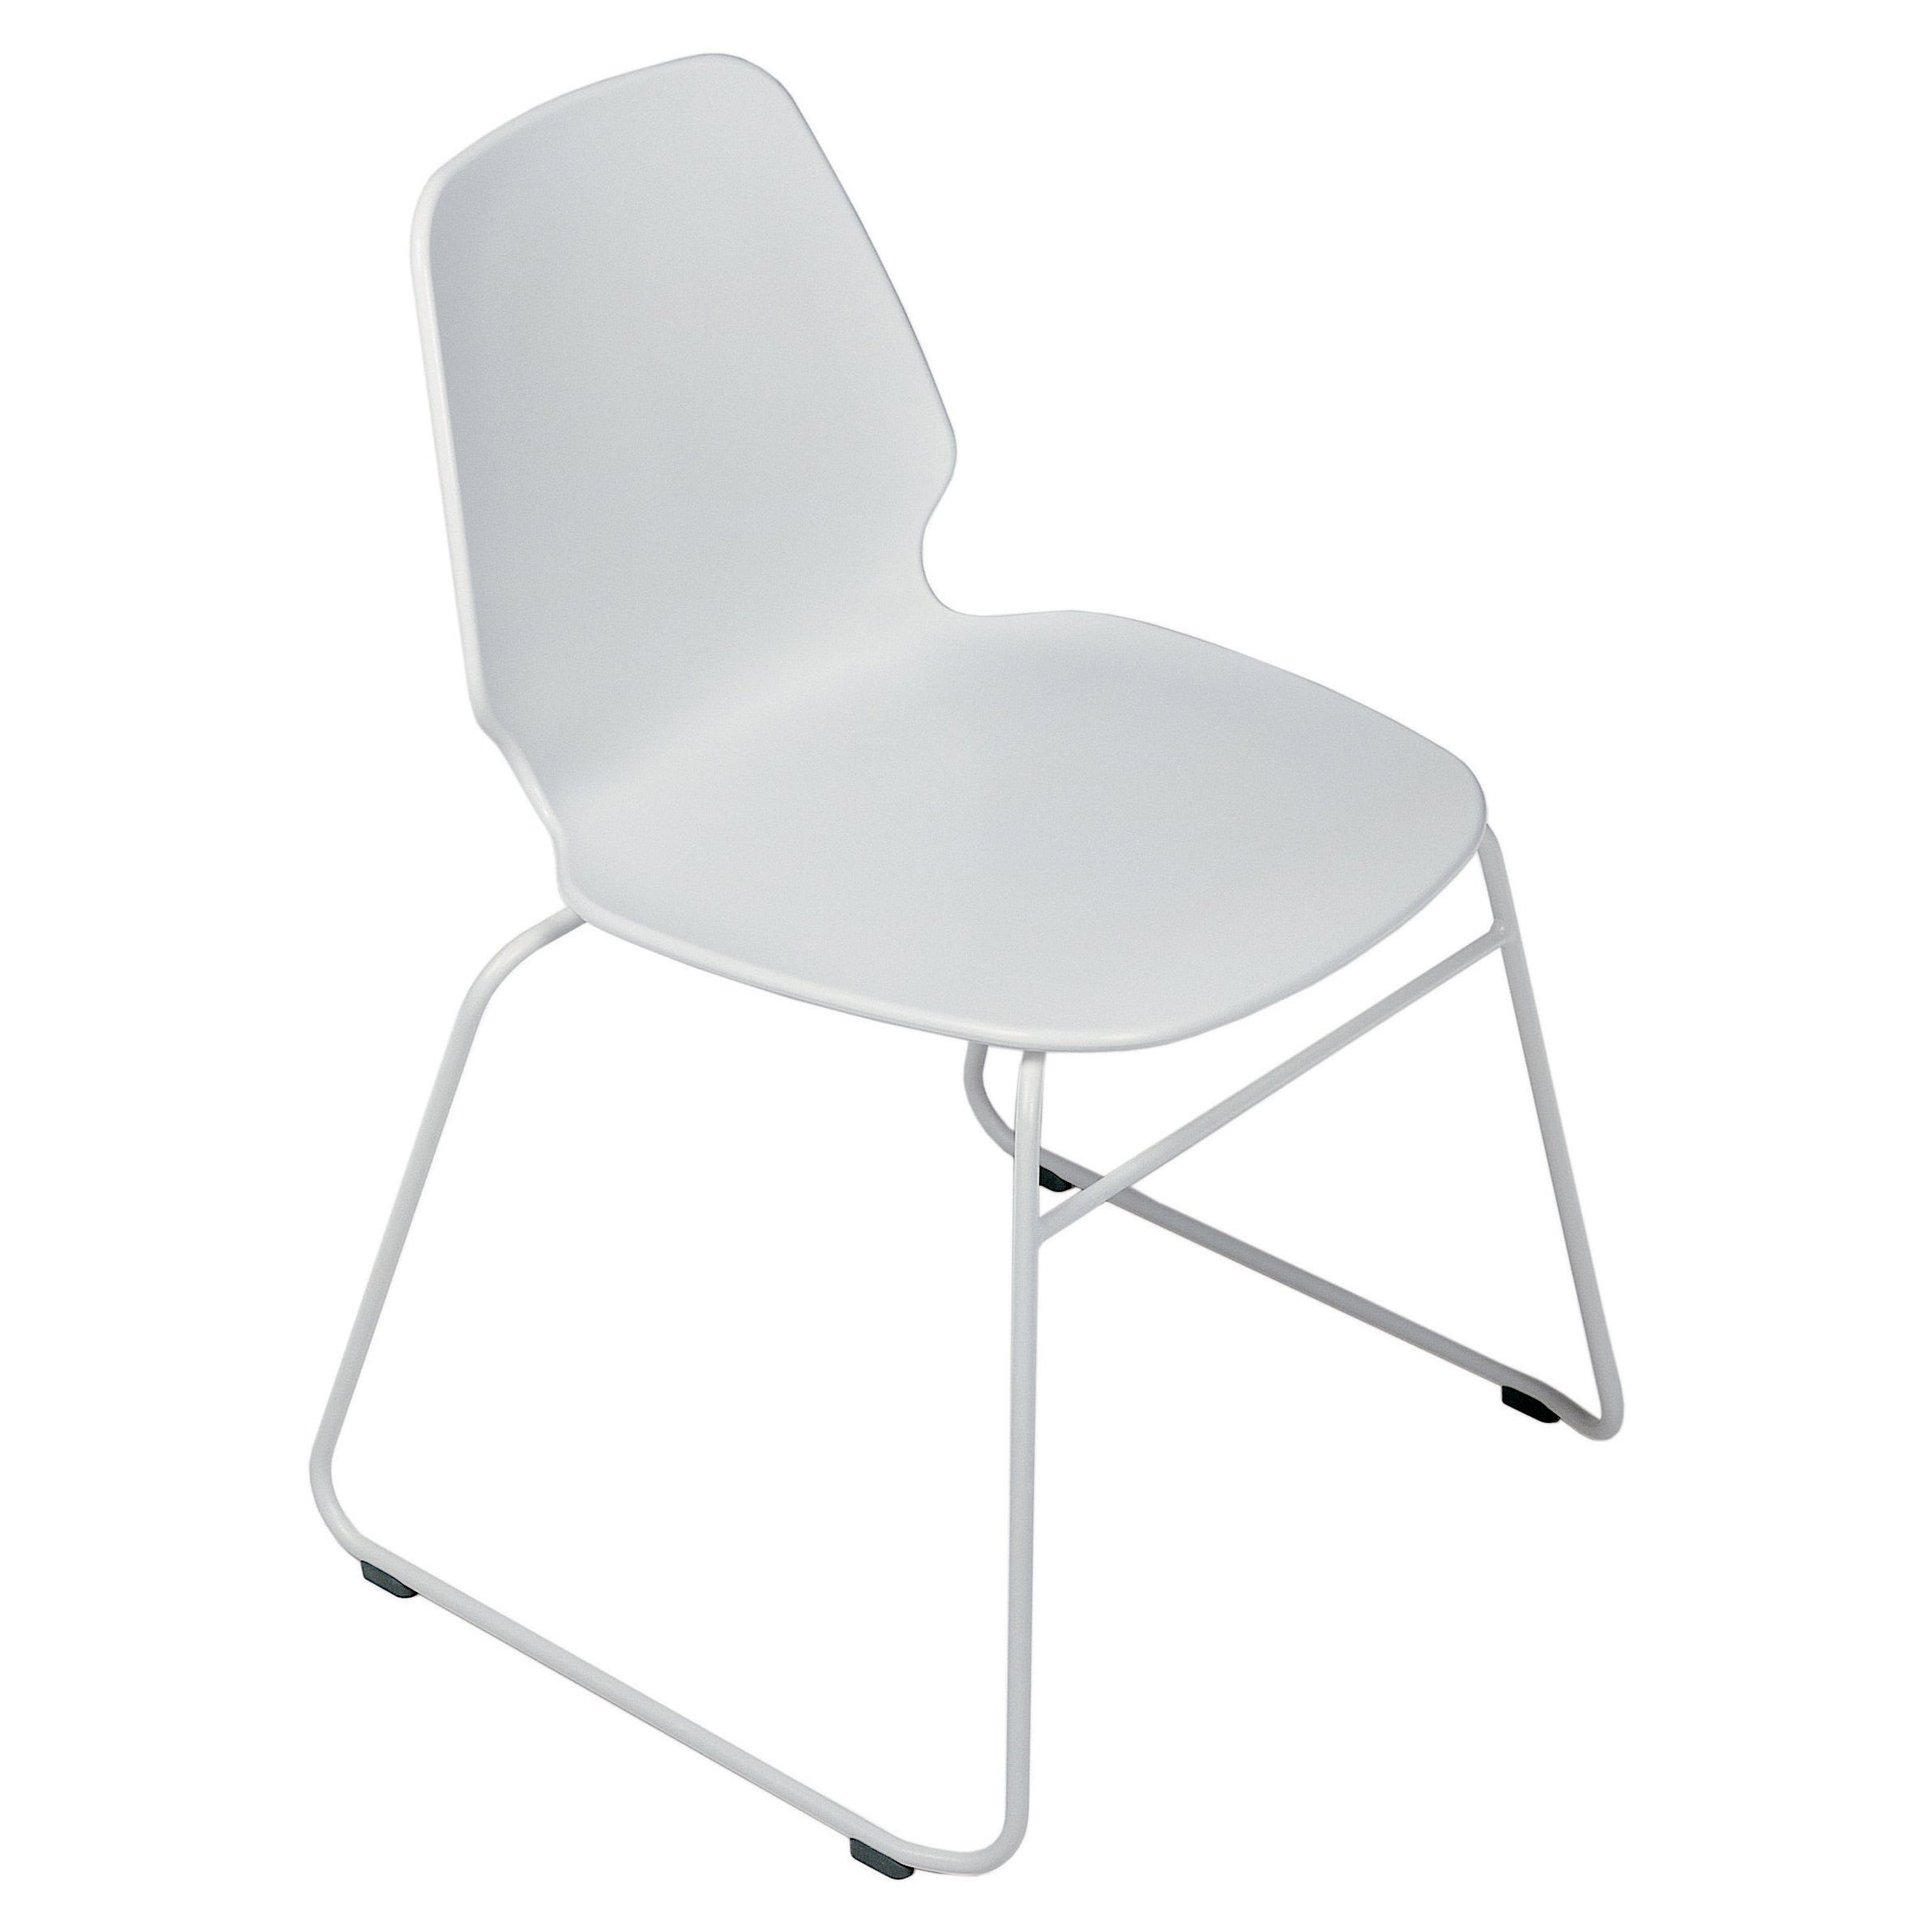 Alias 531 Selinunte Sledge Chair in White Seat and Lacquered Steel Frame